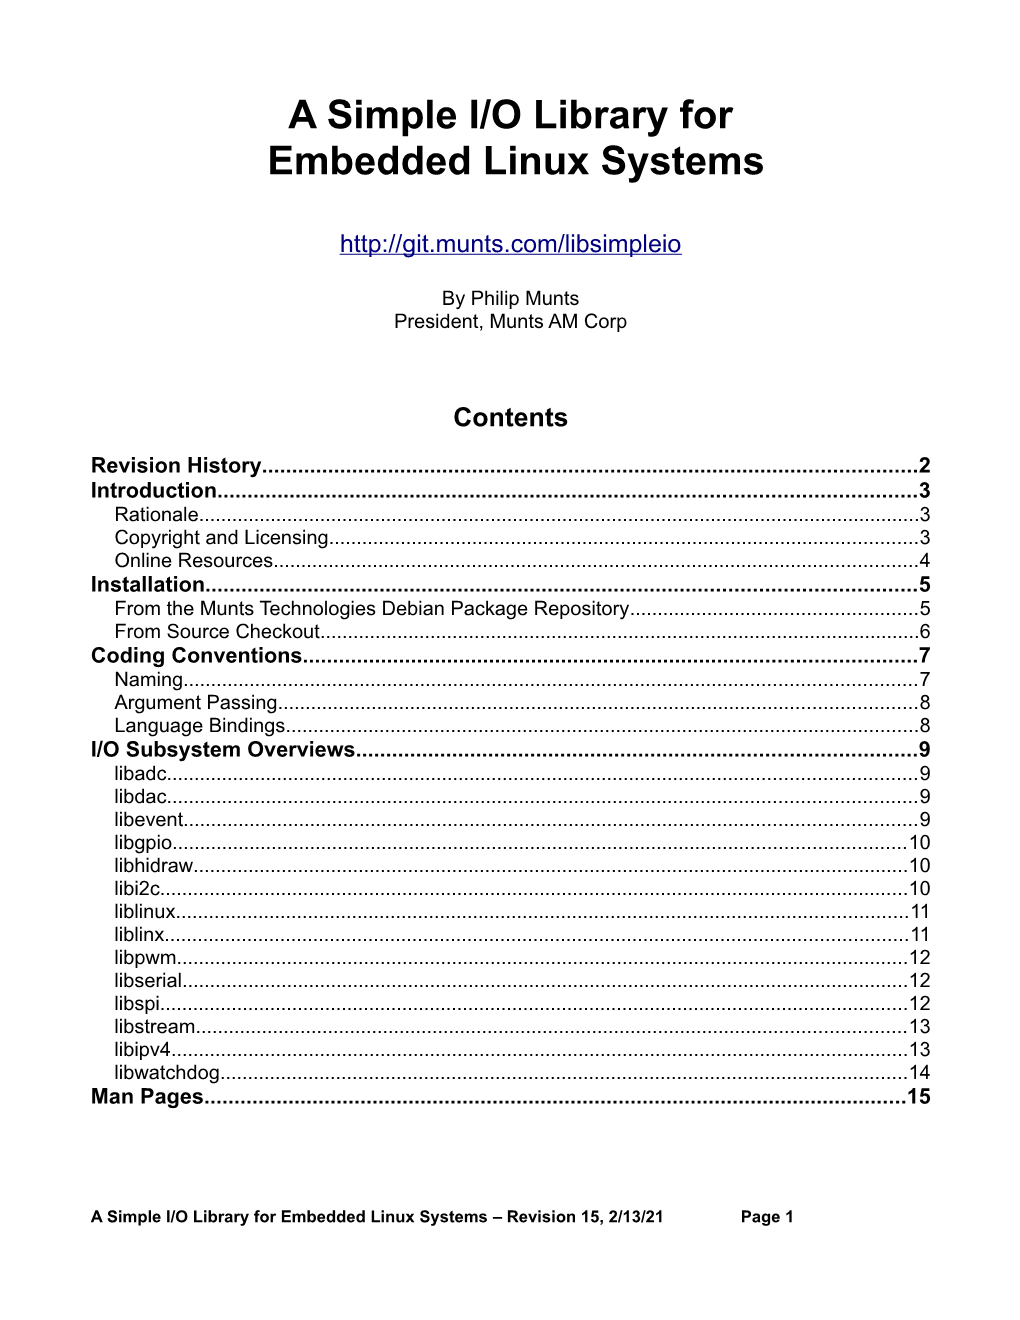 A Simple I/O Library for Embedded Linux Systems